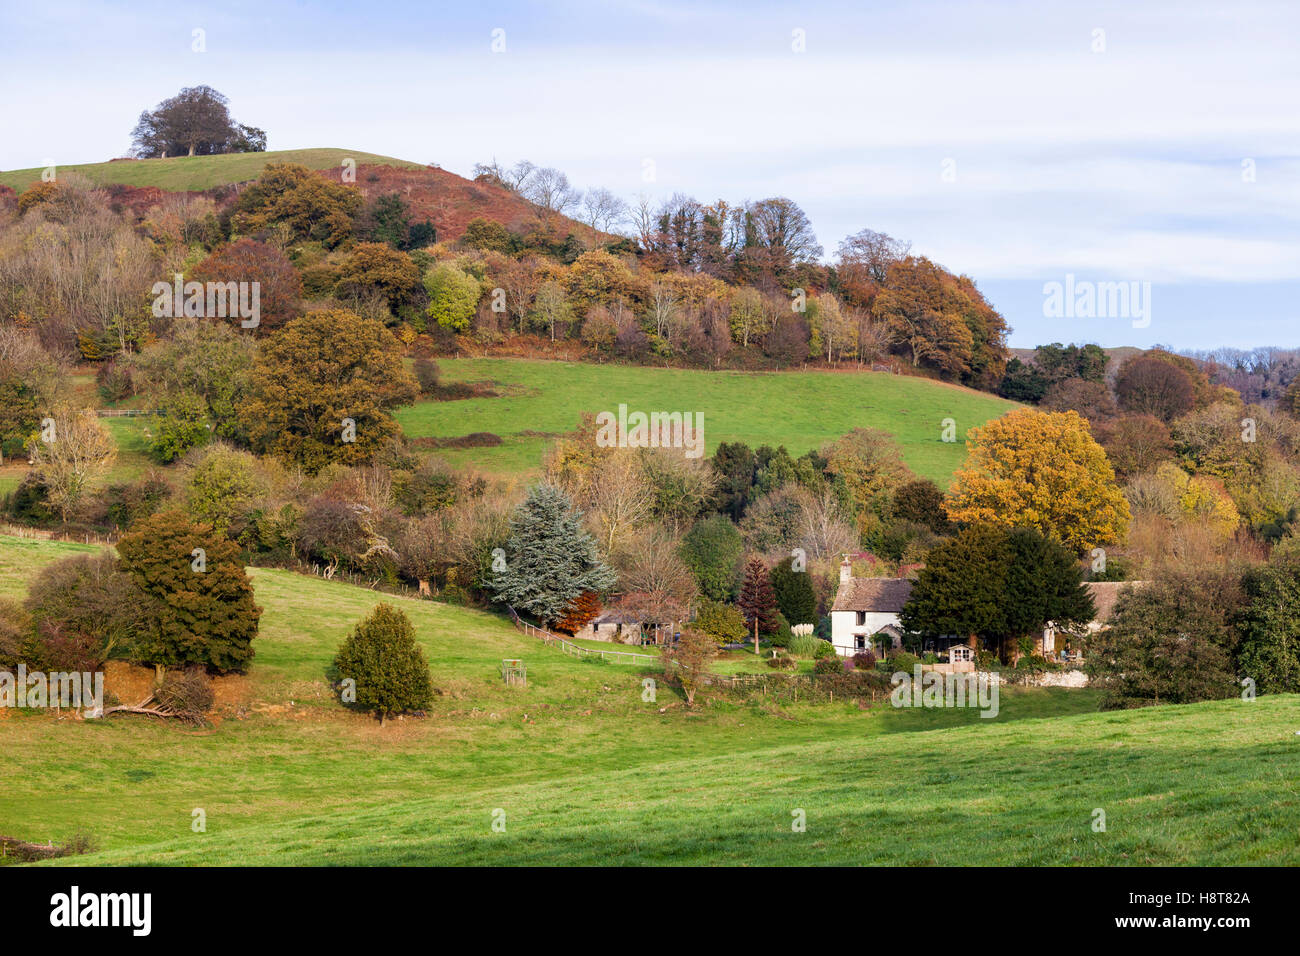 Autunno in Cotswolds - Agriturismo Wresden sotto Downham Hill, Uley, GLOUCESTERSHIRE REGNO UNITO Foto Stock